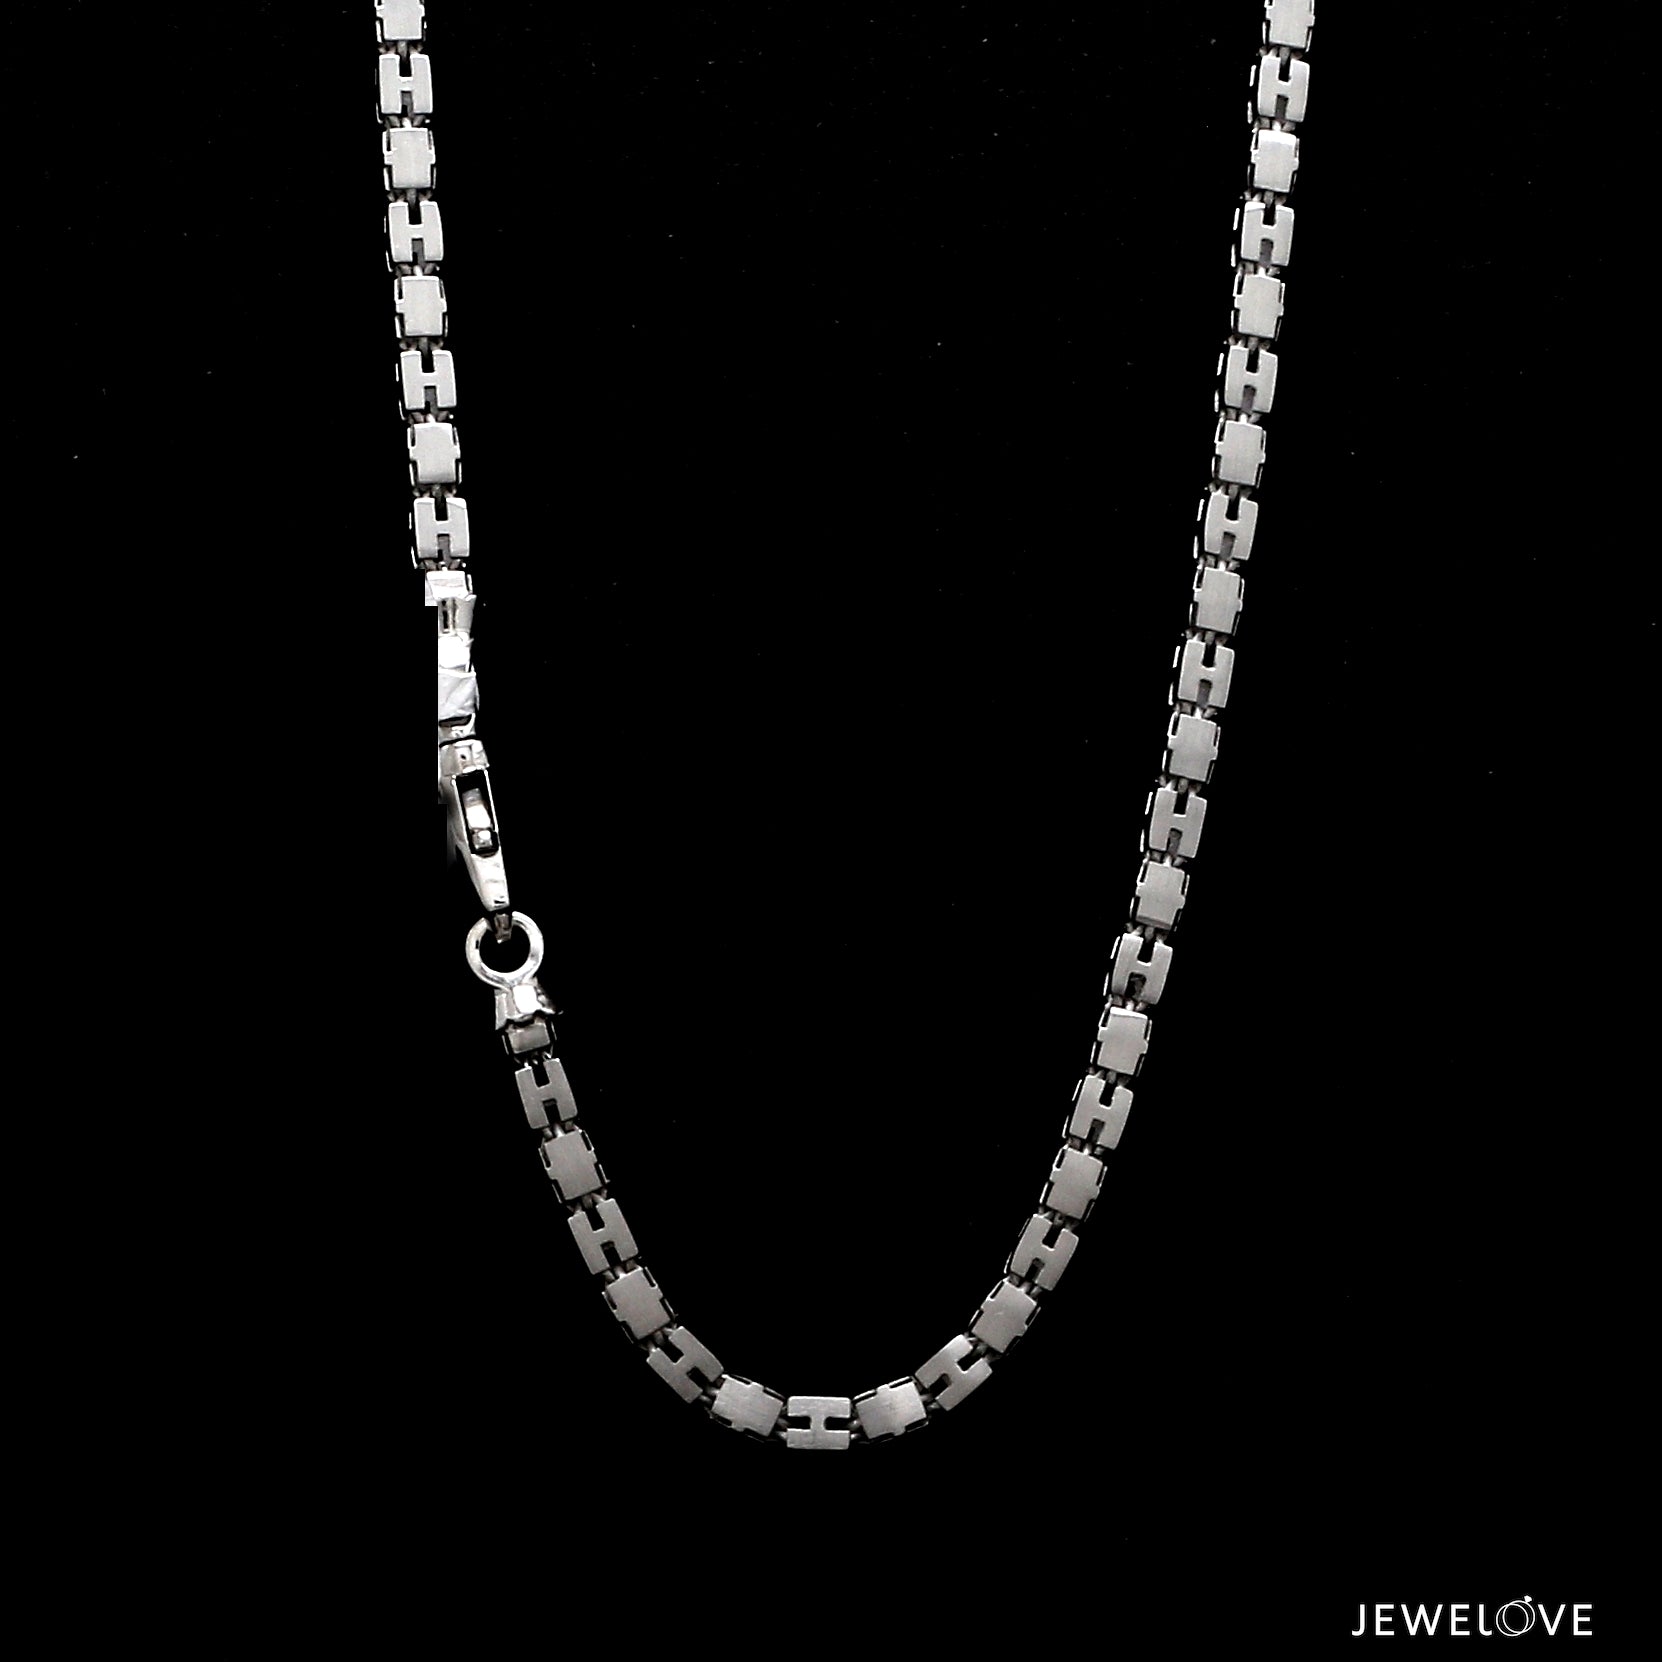 3.25mm Platinum Rose Gold Chain with Matte Finish for Men JL PT CH 1236   Jewelove.US